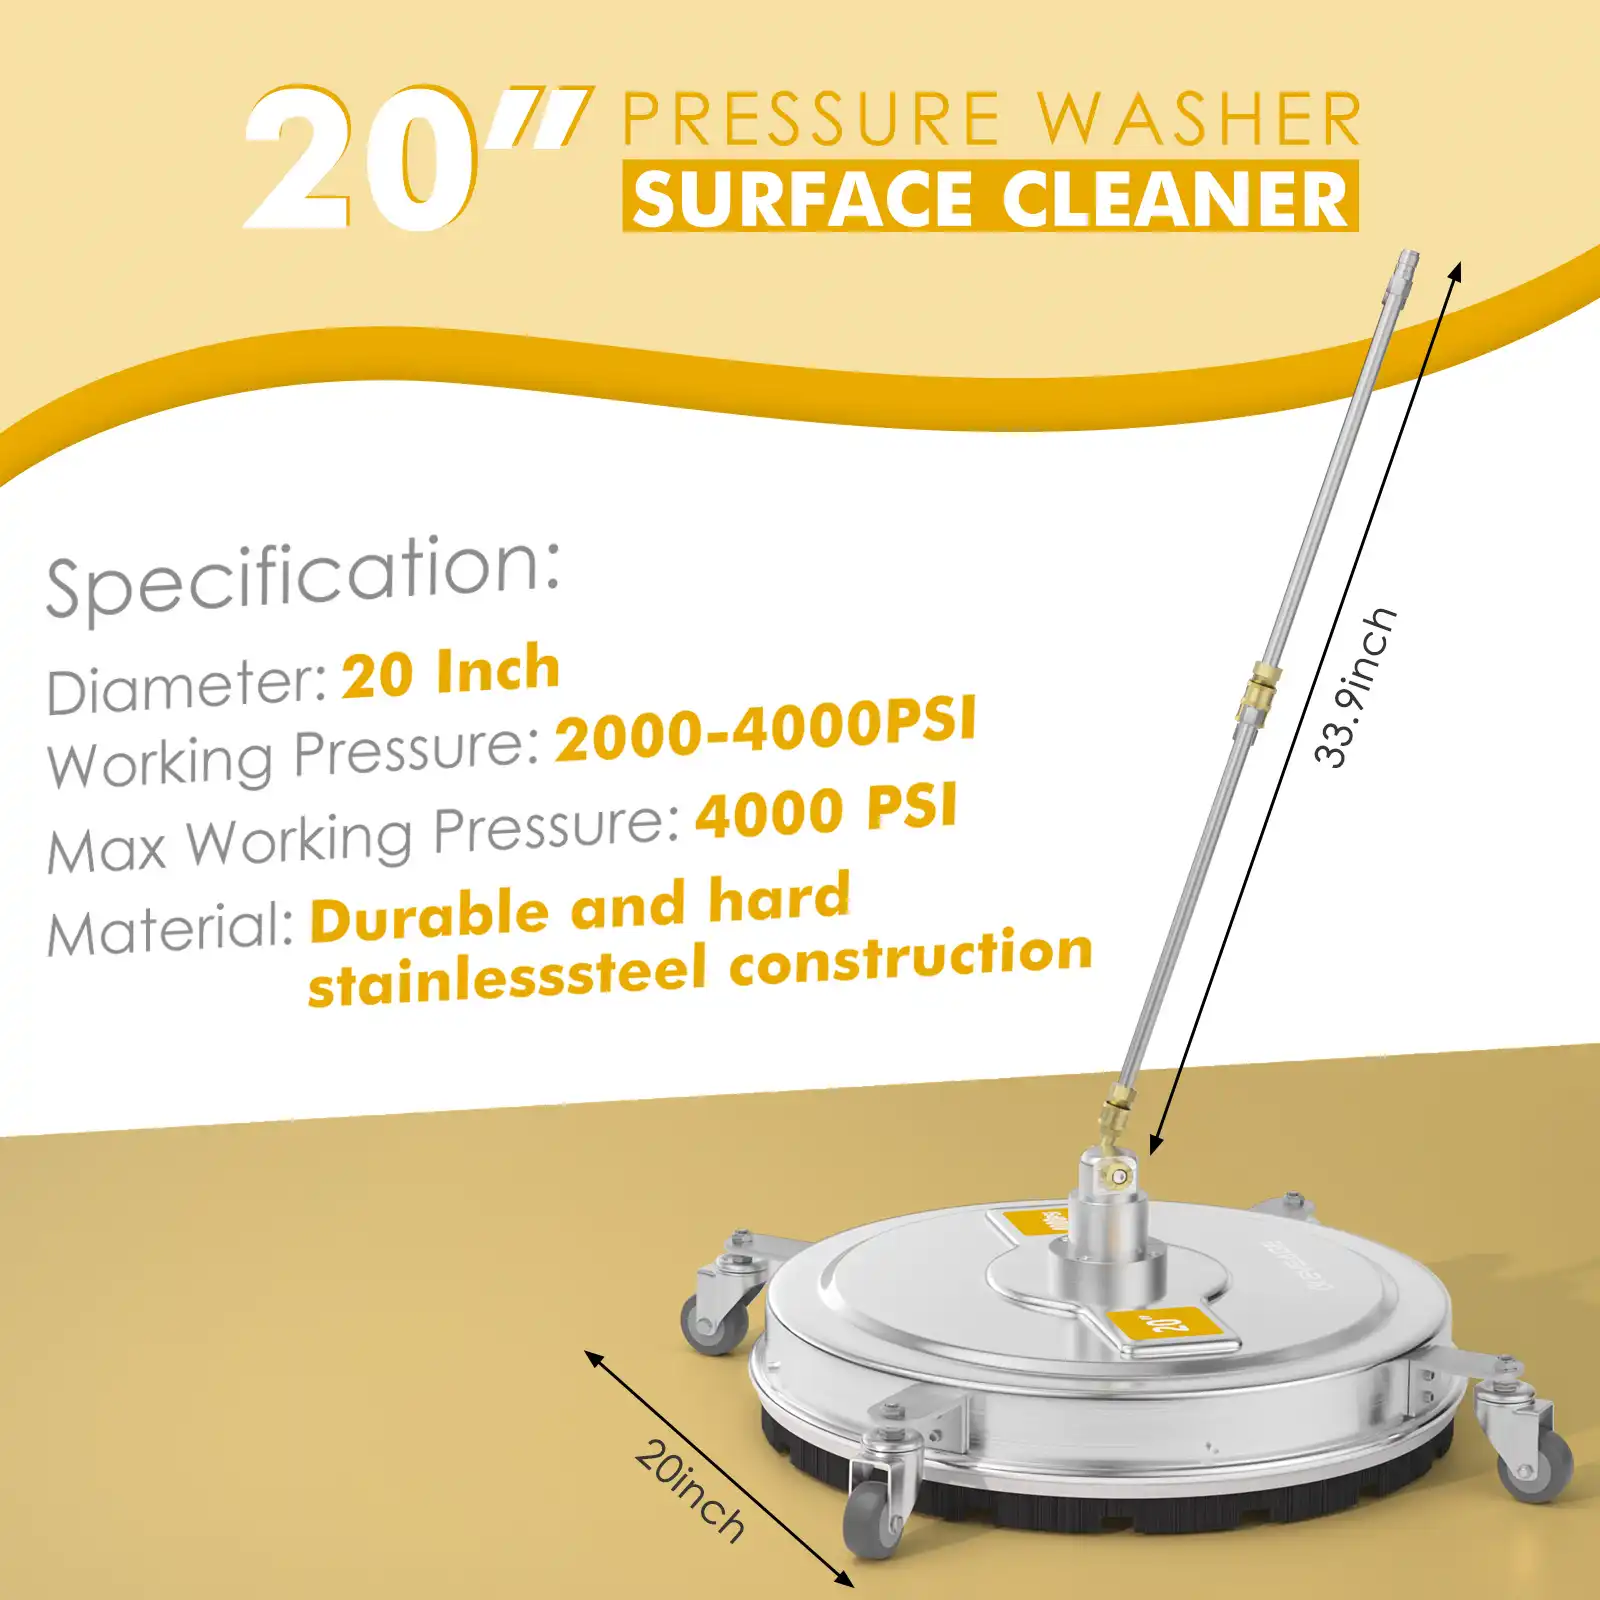 EVEAGE 20” Pressure Washer Surface Cleaner with 4 Wheels Stainless Steel Housing Power Washer Surface Cleaner